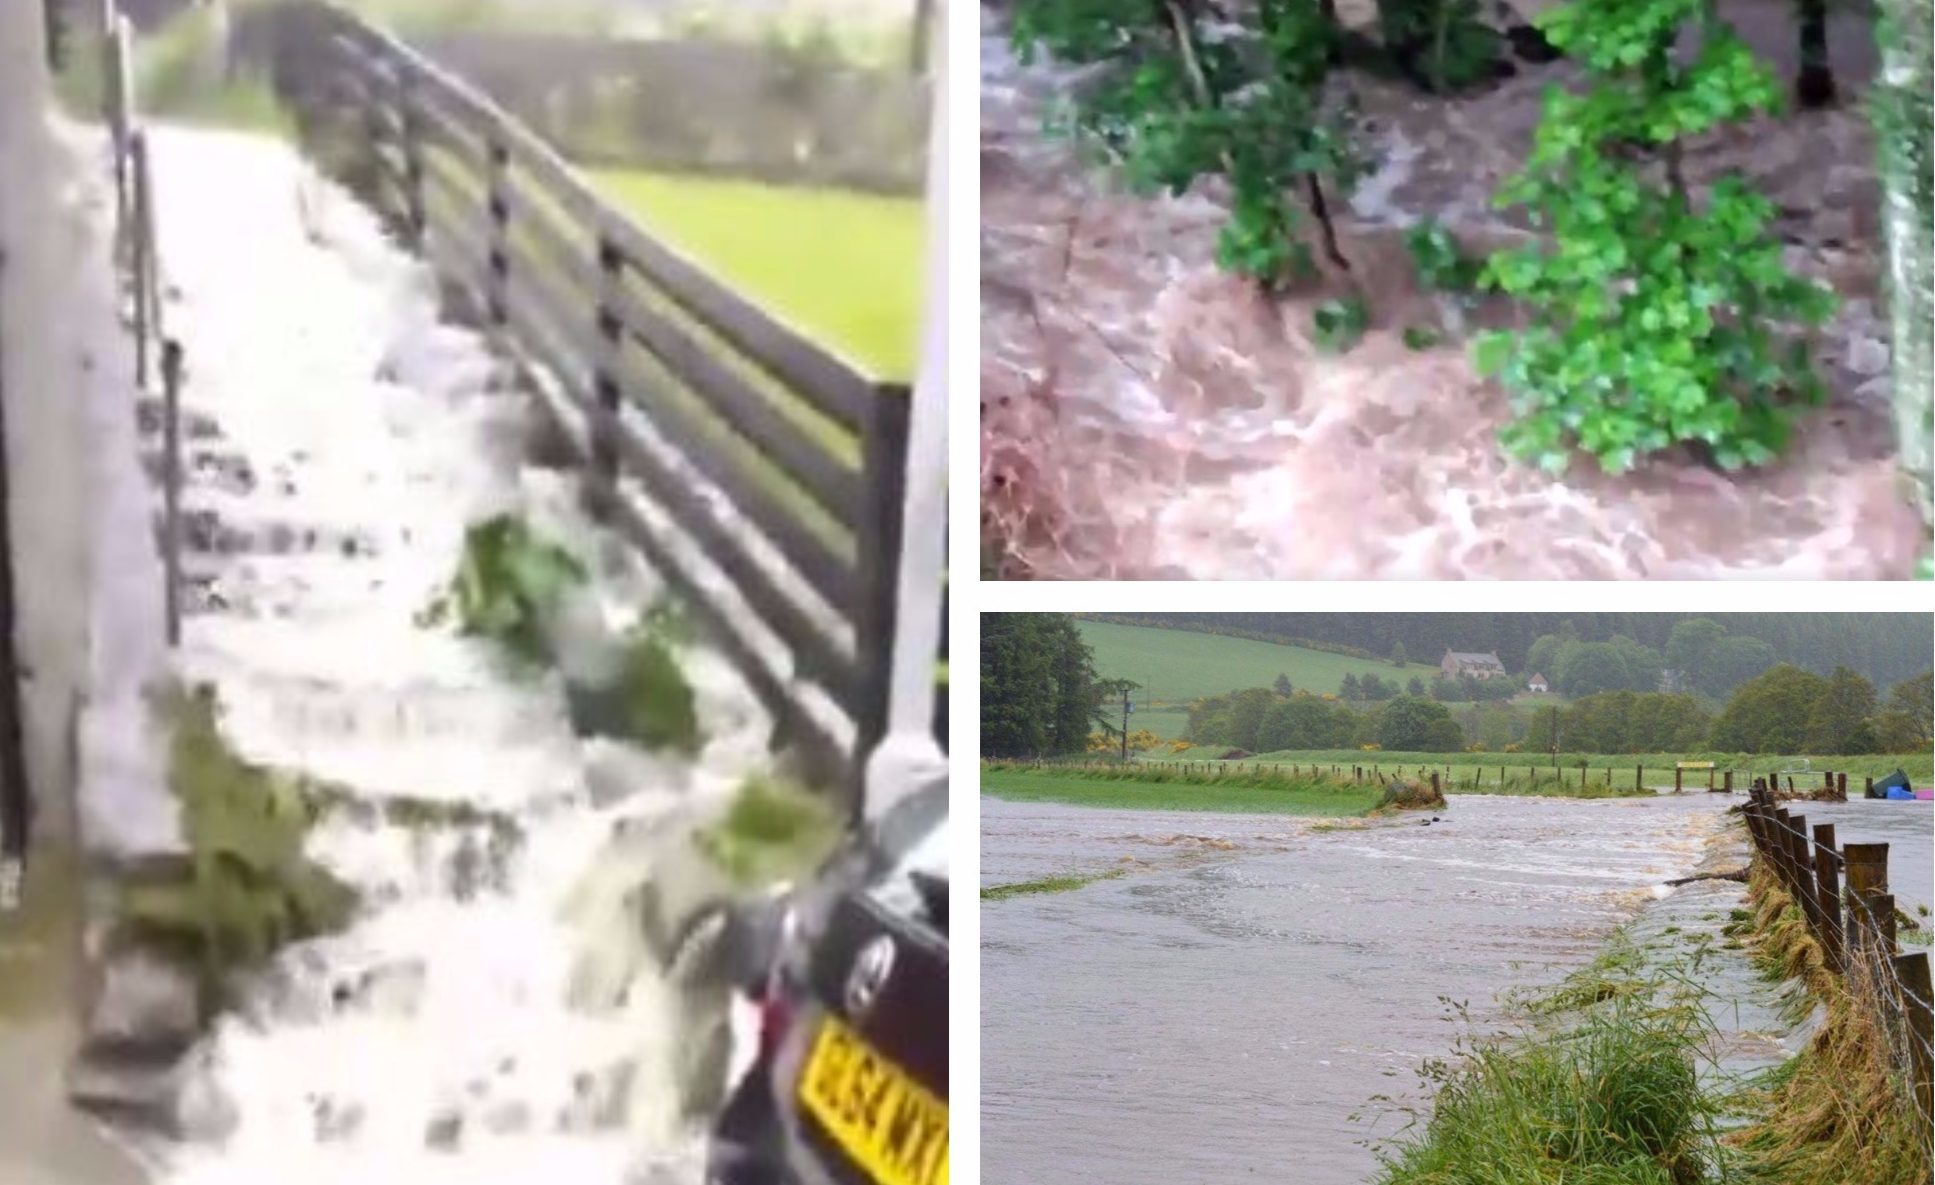 Flooding has hit parts of Scotland. Credit: Ricky Boyd, Kirsty Boyle and Caroline McFarlane on Twitter.